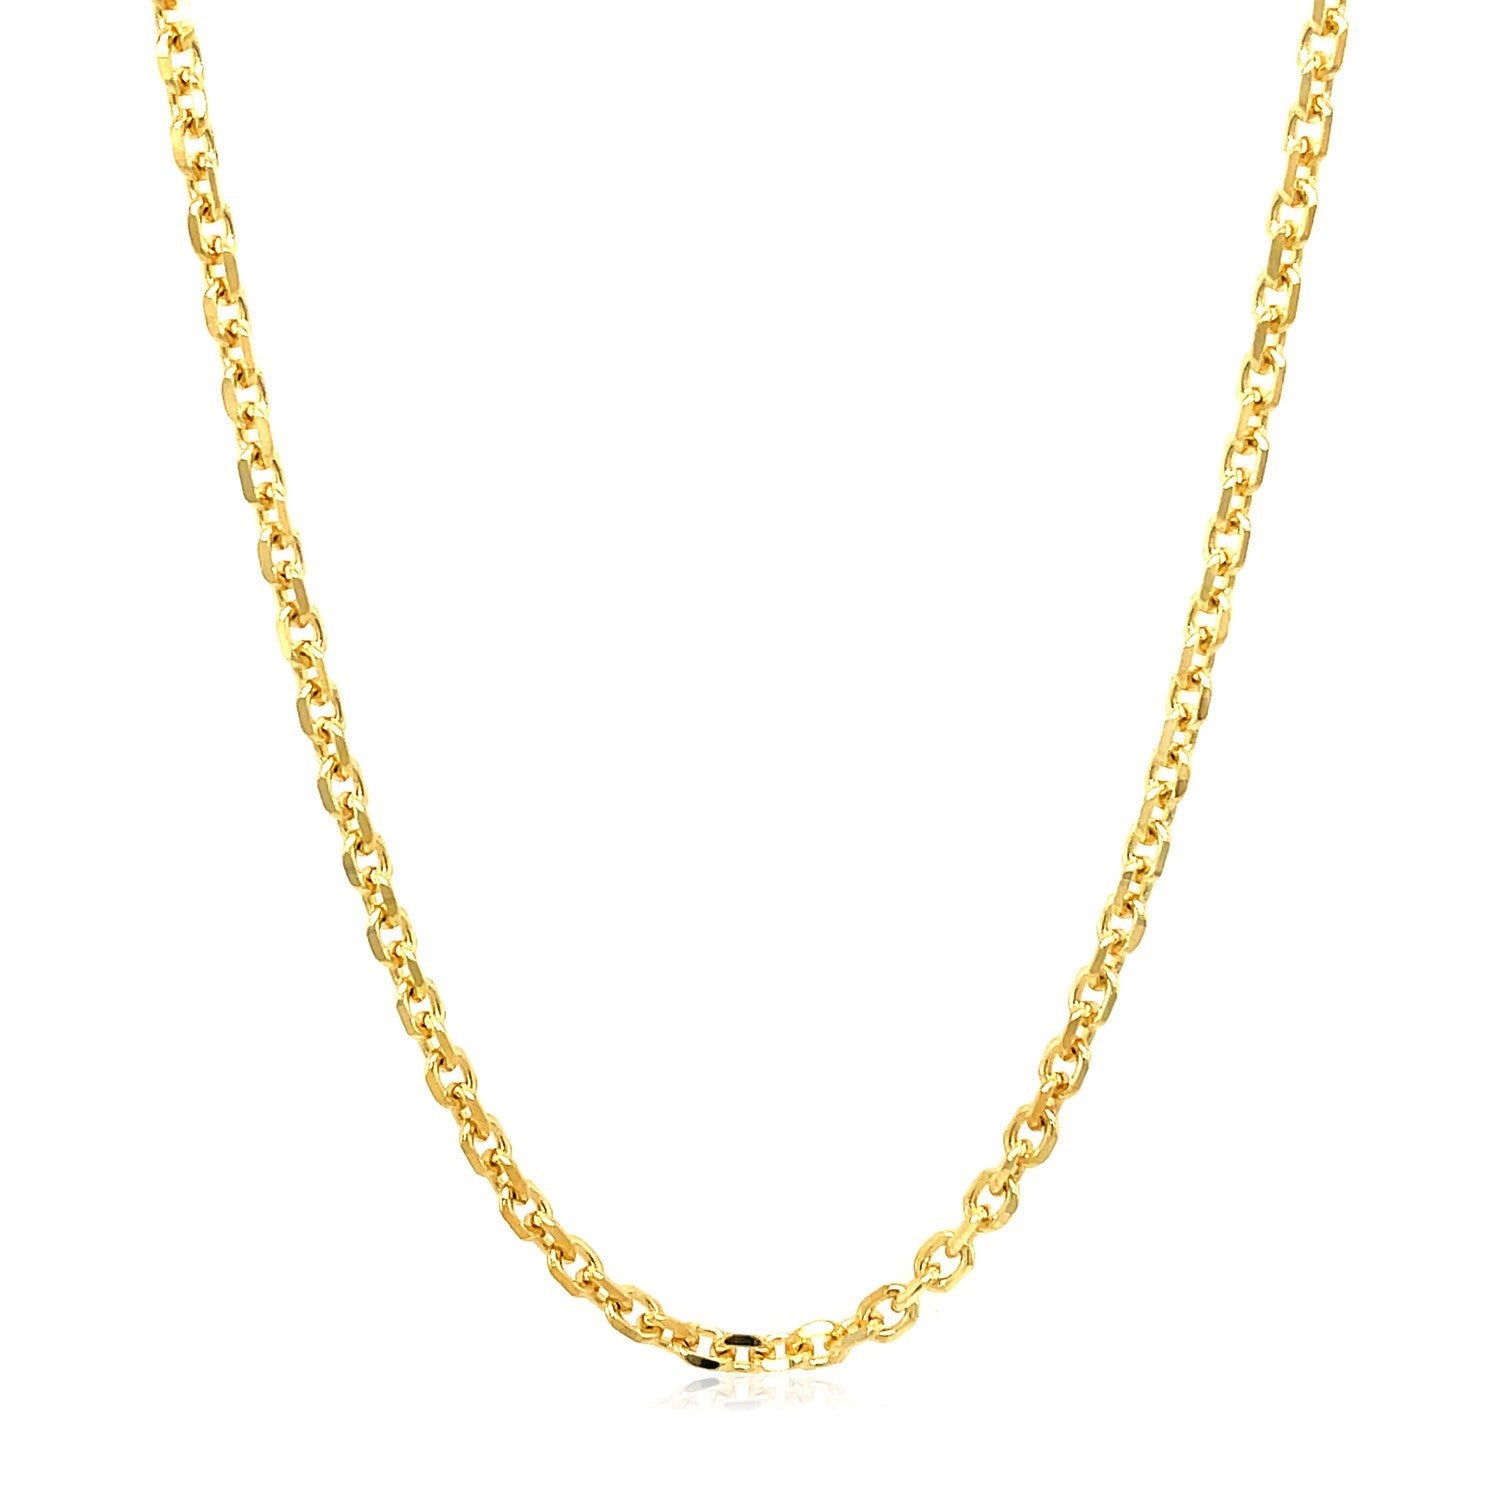 2 6Mm 18K Yellow Gold Diamond Cut Cable Link Chain 77467-2